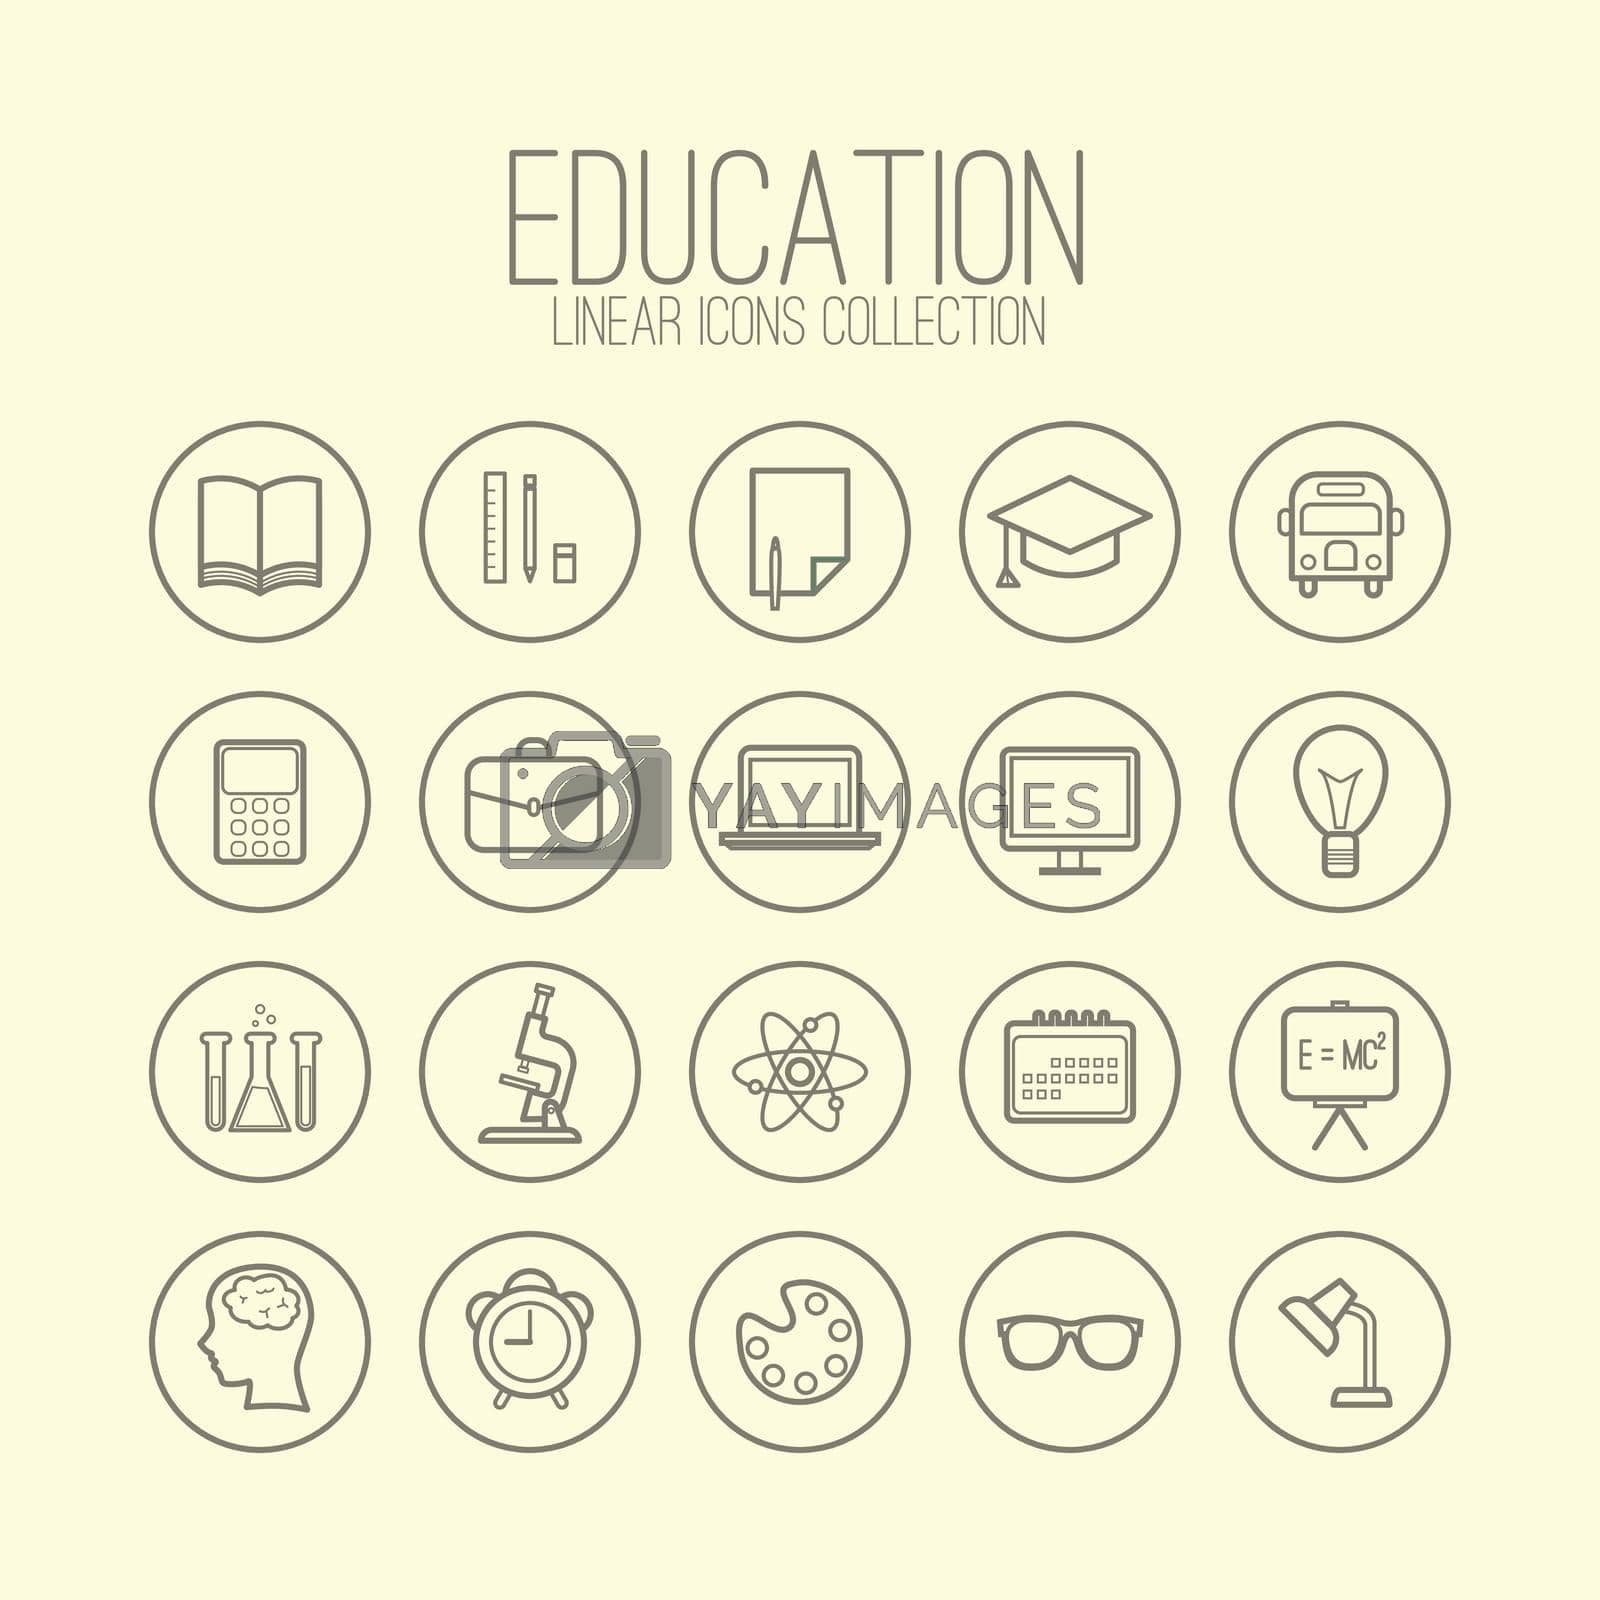 Education Linear Icons Collection